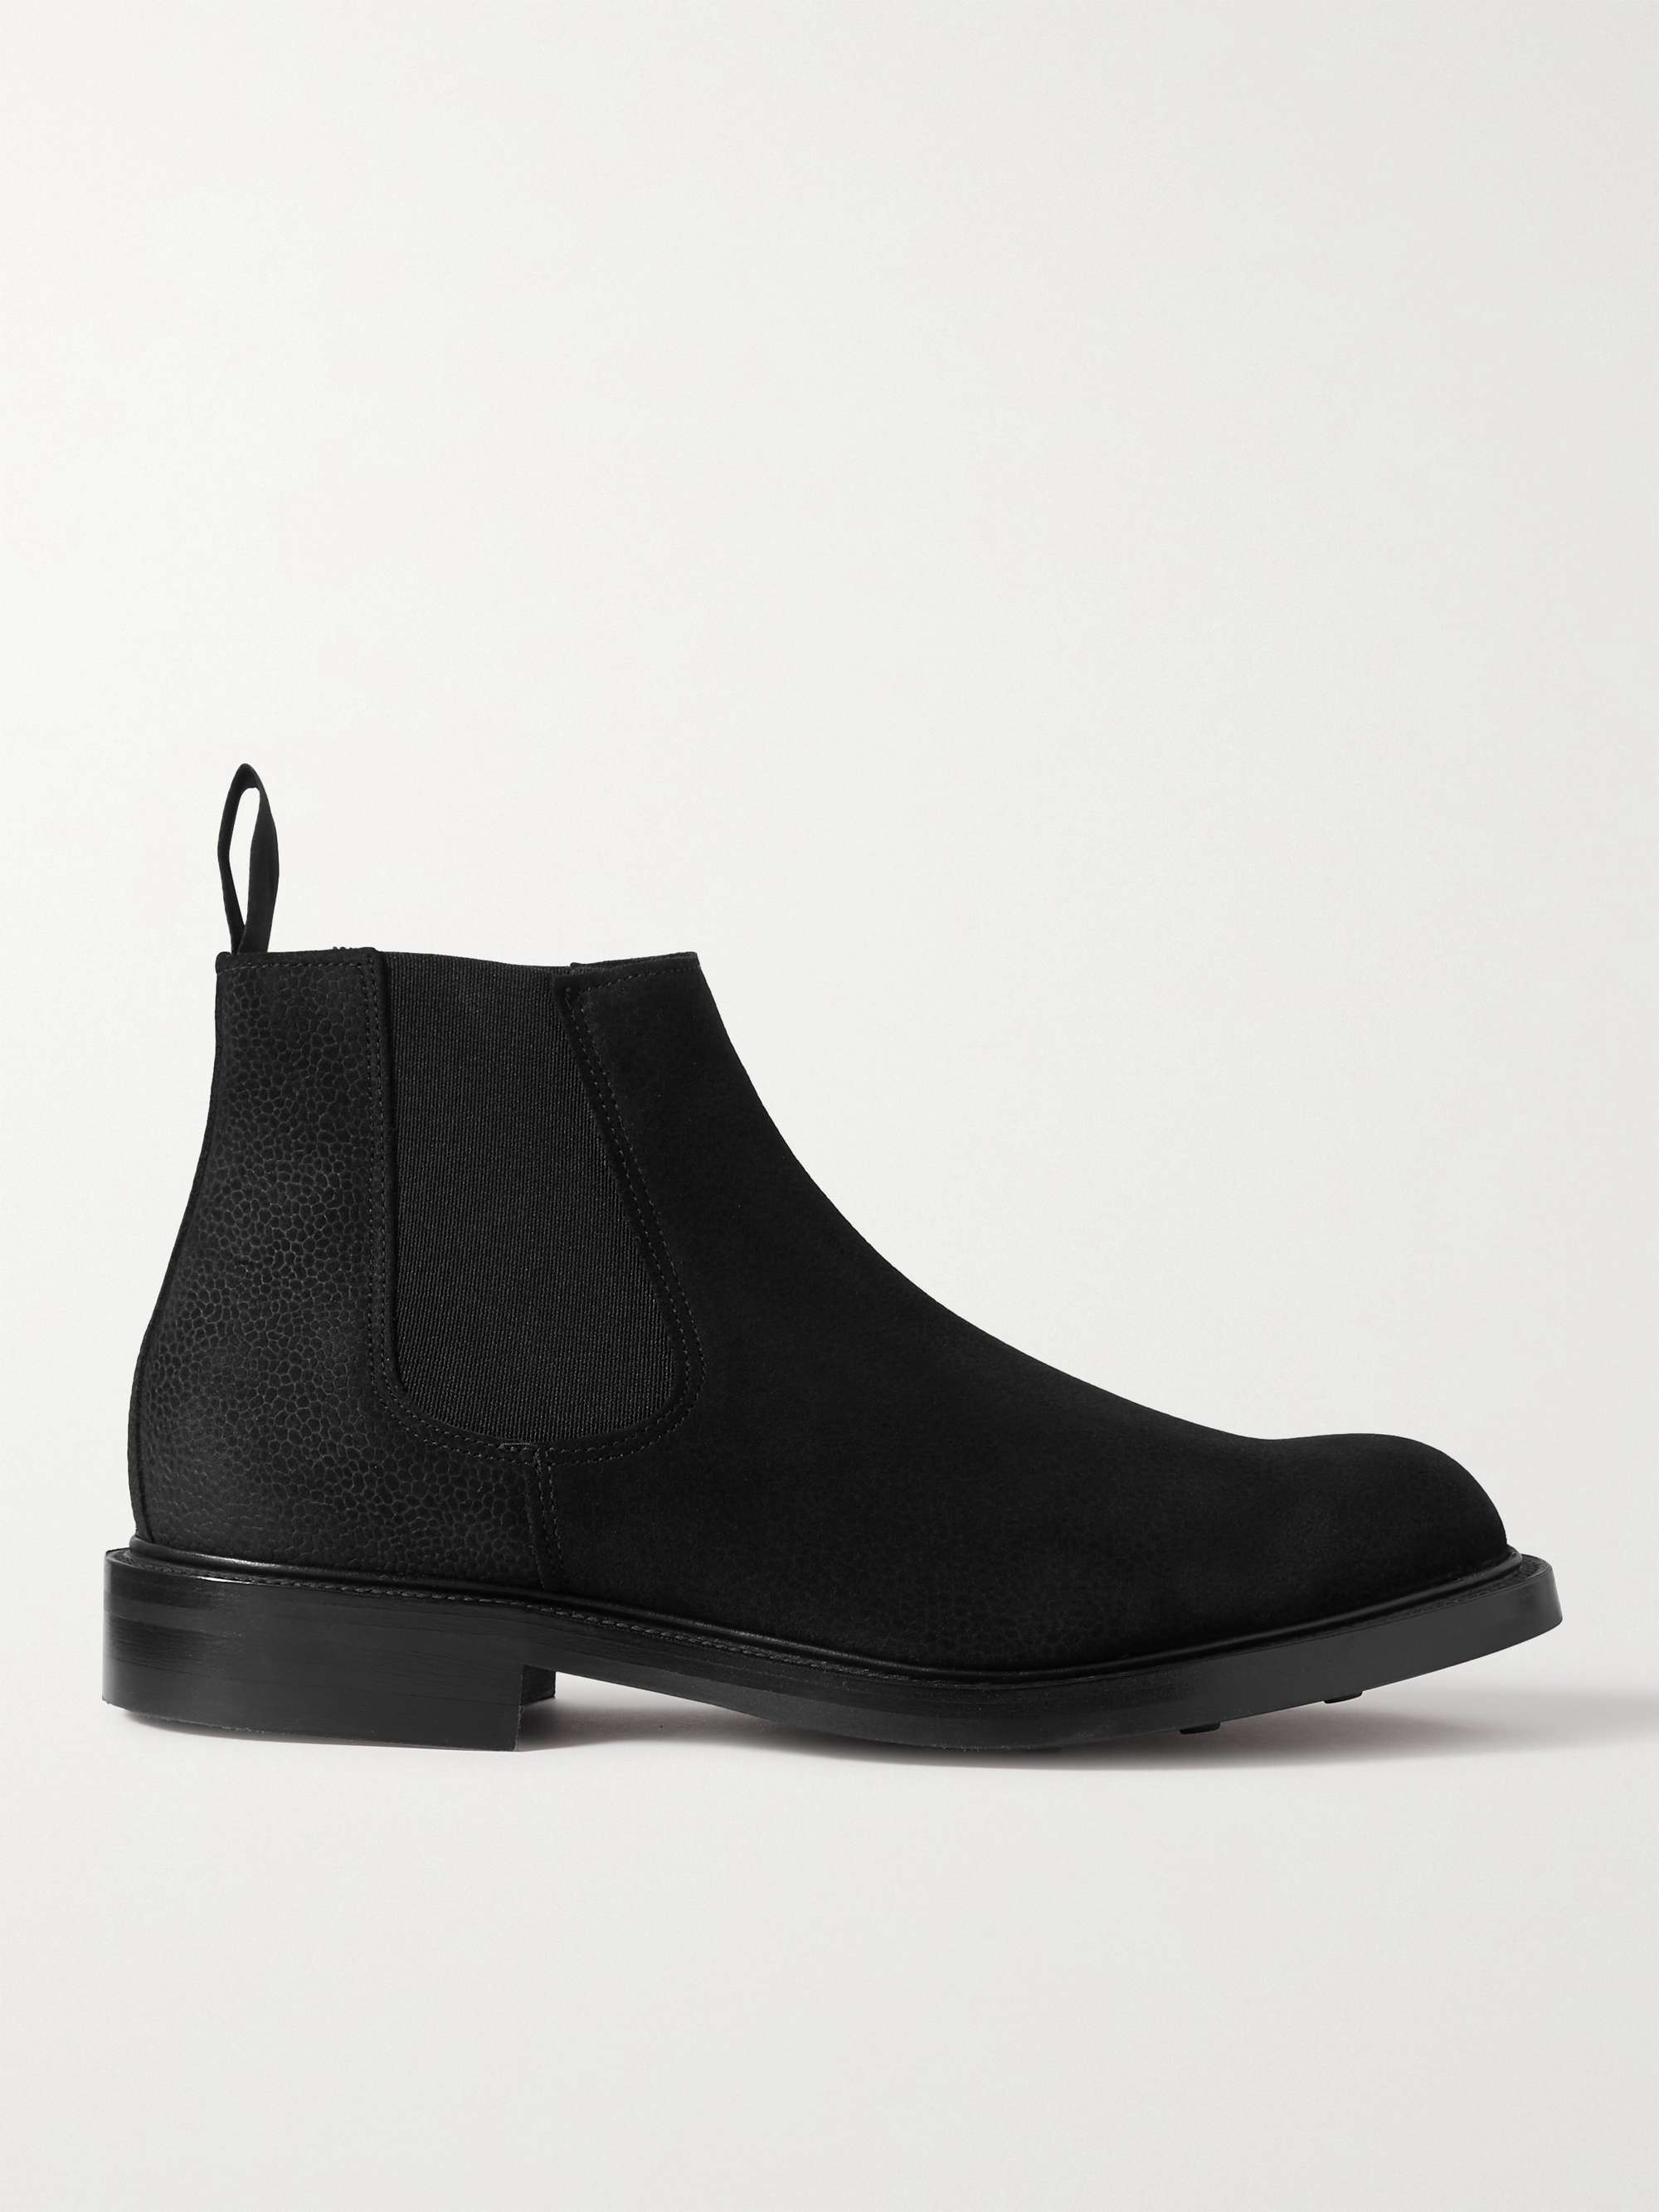 GEORGE CLEVERLEY Jason Full-Grain Suede Chelsea Boots